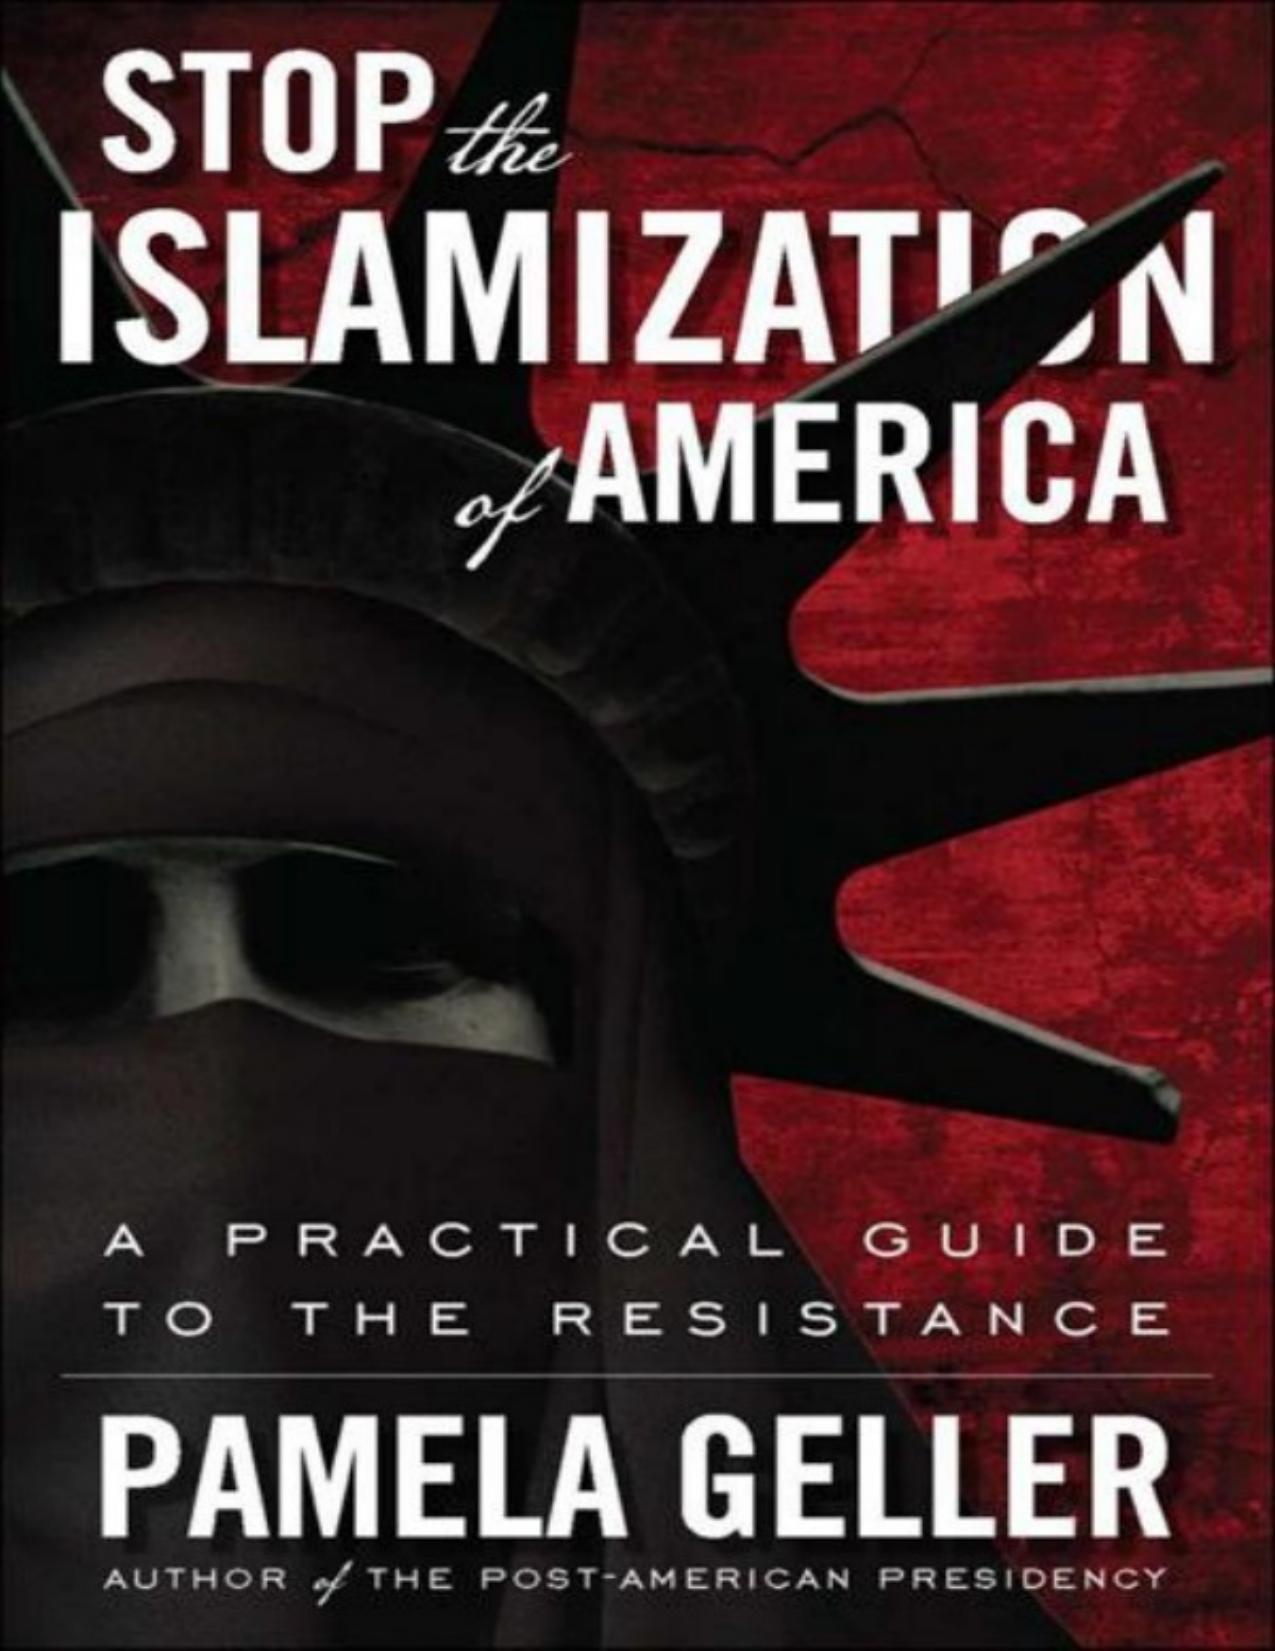 Stop the Islamization of America: A Practical Guide to the Resistance by Pamela Geller